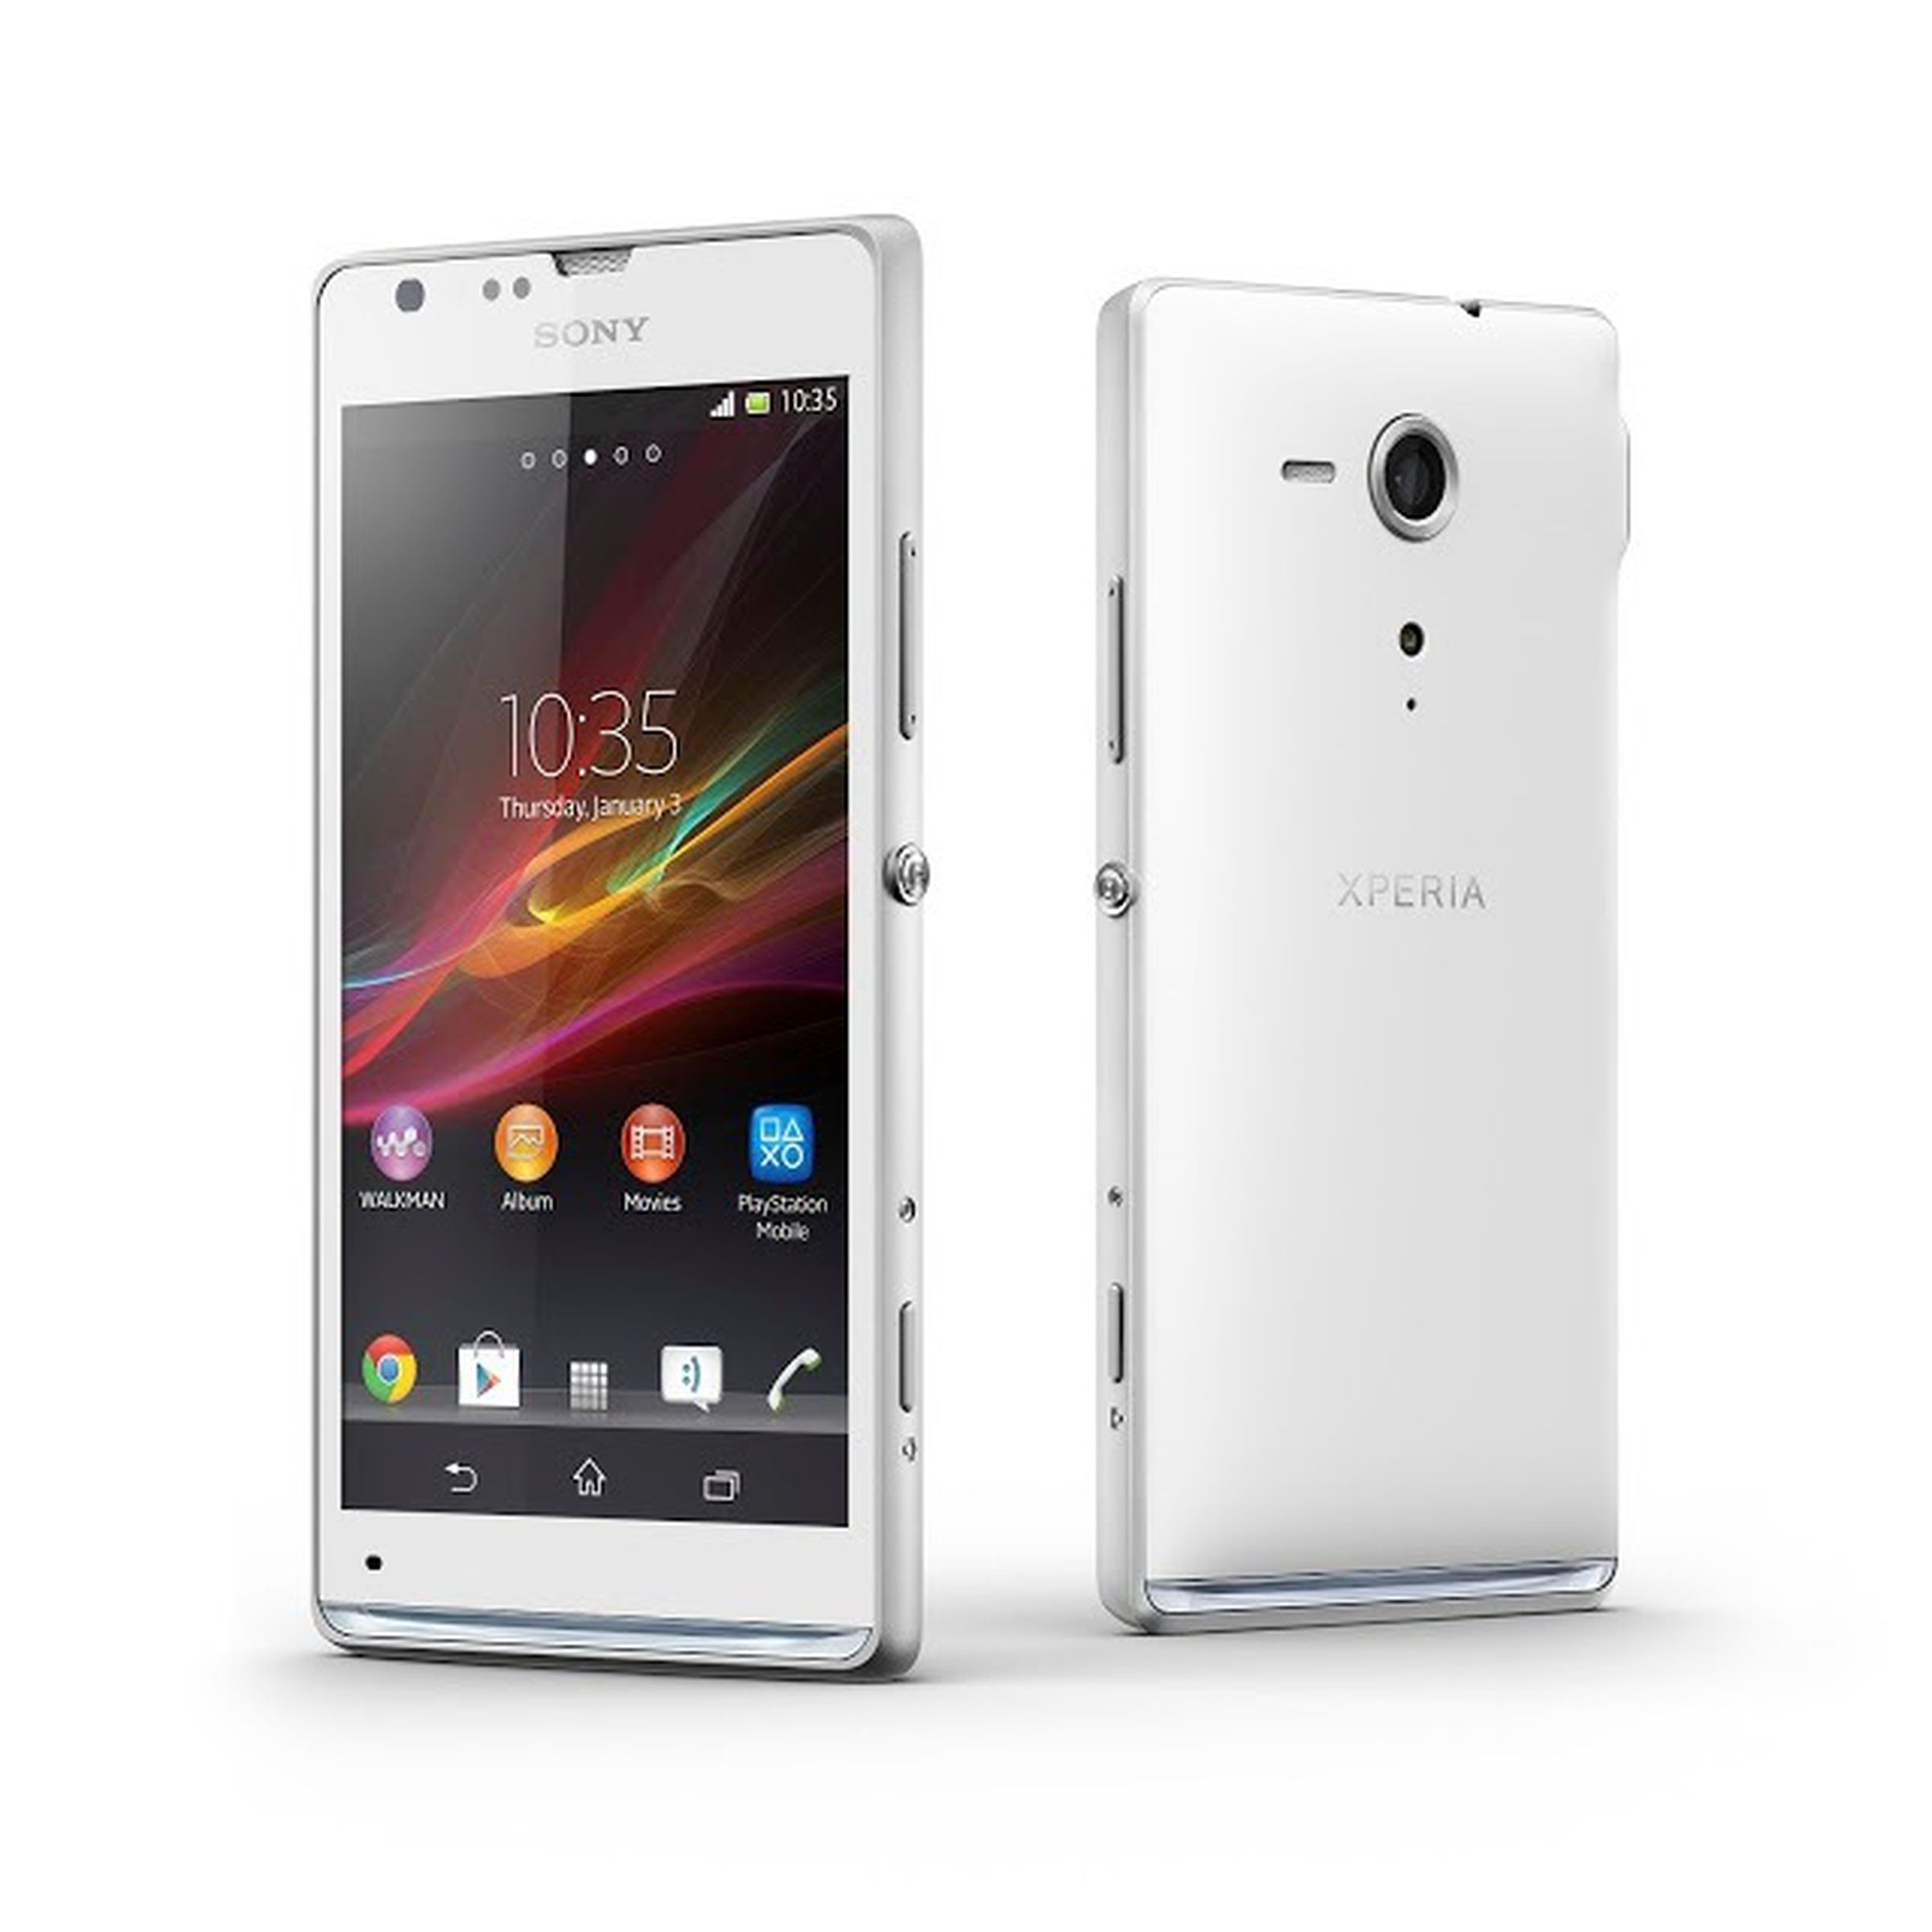 Sony Xperia SP press pictures